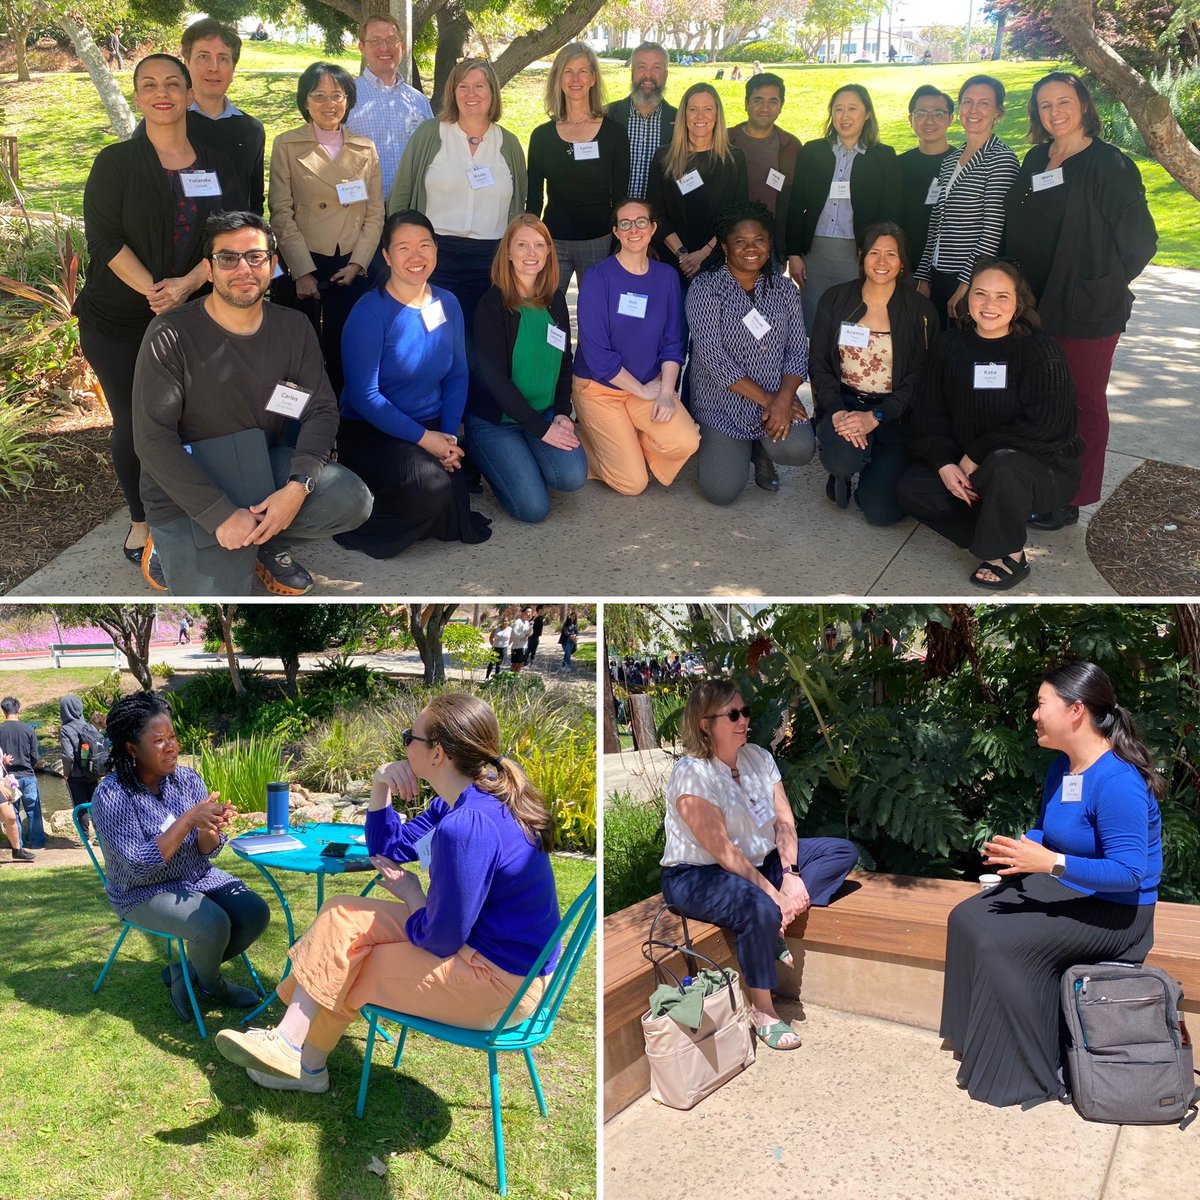 A wonderful @ACS_Research grantsmanship workshop @SDSU. A fantastic presentation by @lopanik followed by 1-on-1s by a fish & turtle pond. Such a beautiful setting to meet w/ an enthusiastic & talented group of cancer researchers. Thanks to @AmericanCancer staff for the assist.